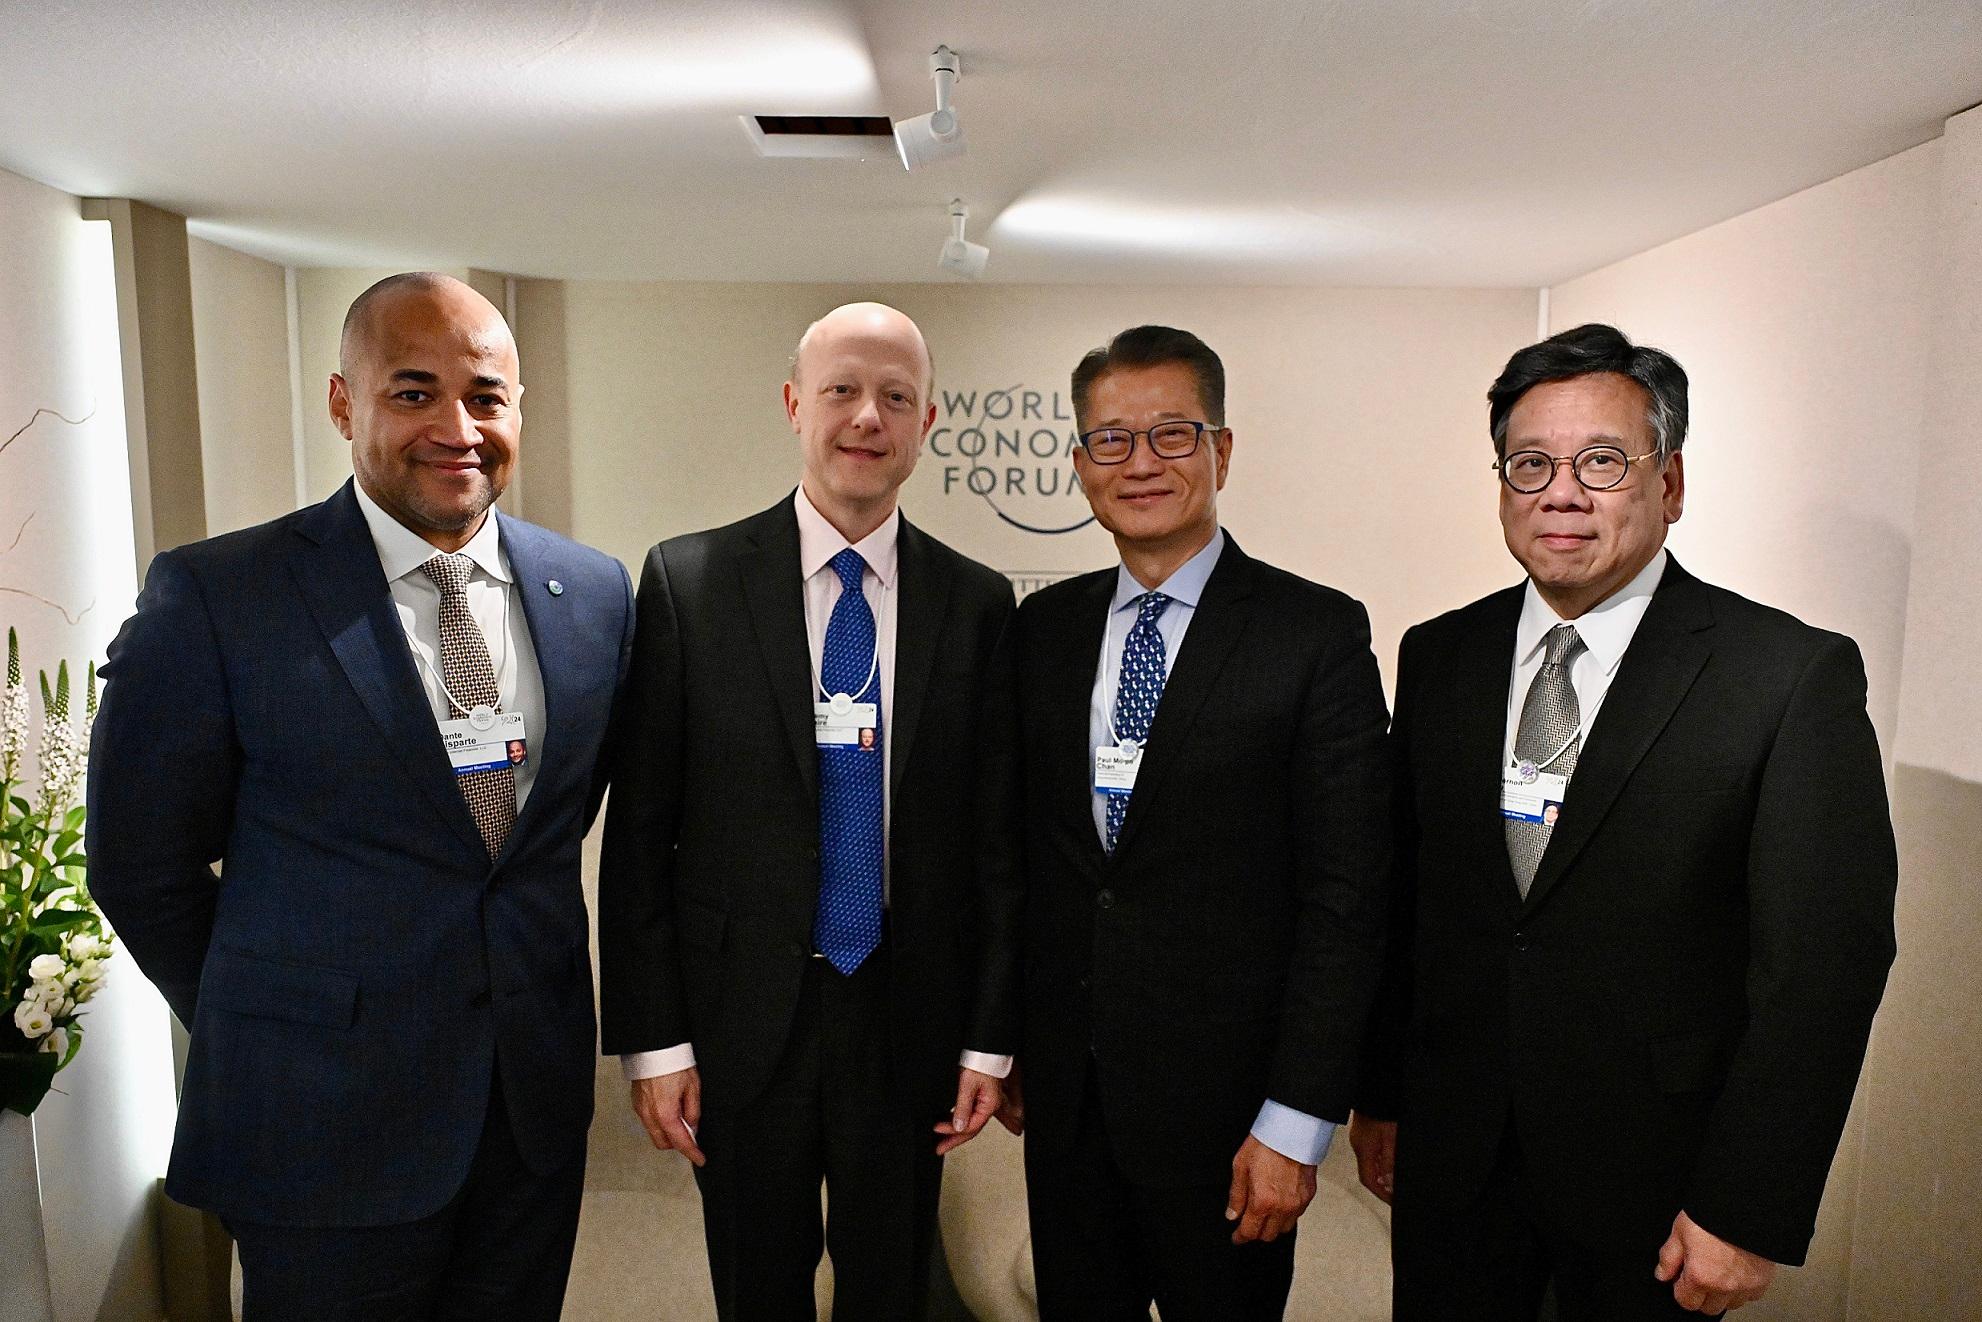 The Financial Secretary, Mr Paul Chan (second right) and the Secretary for Commerce and Economic Development, Mr Algernon Yau (first right), meets with the Co-Founder, Chairman and Chief Executive Officer of stablecoin issuer Circle Internet Financial, Mr Jeremy Allaire (second left) , on January 15 (Davos time) during the World Economic Forum Annual Meeting at Davos, Switzerland.